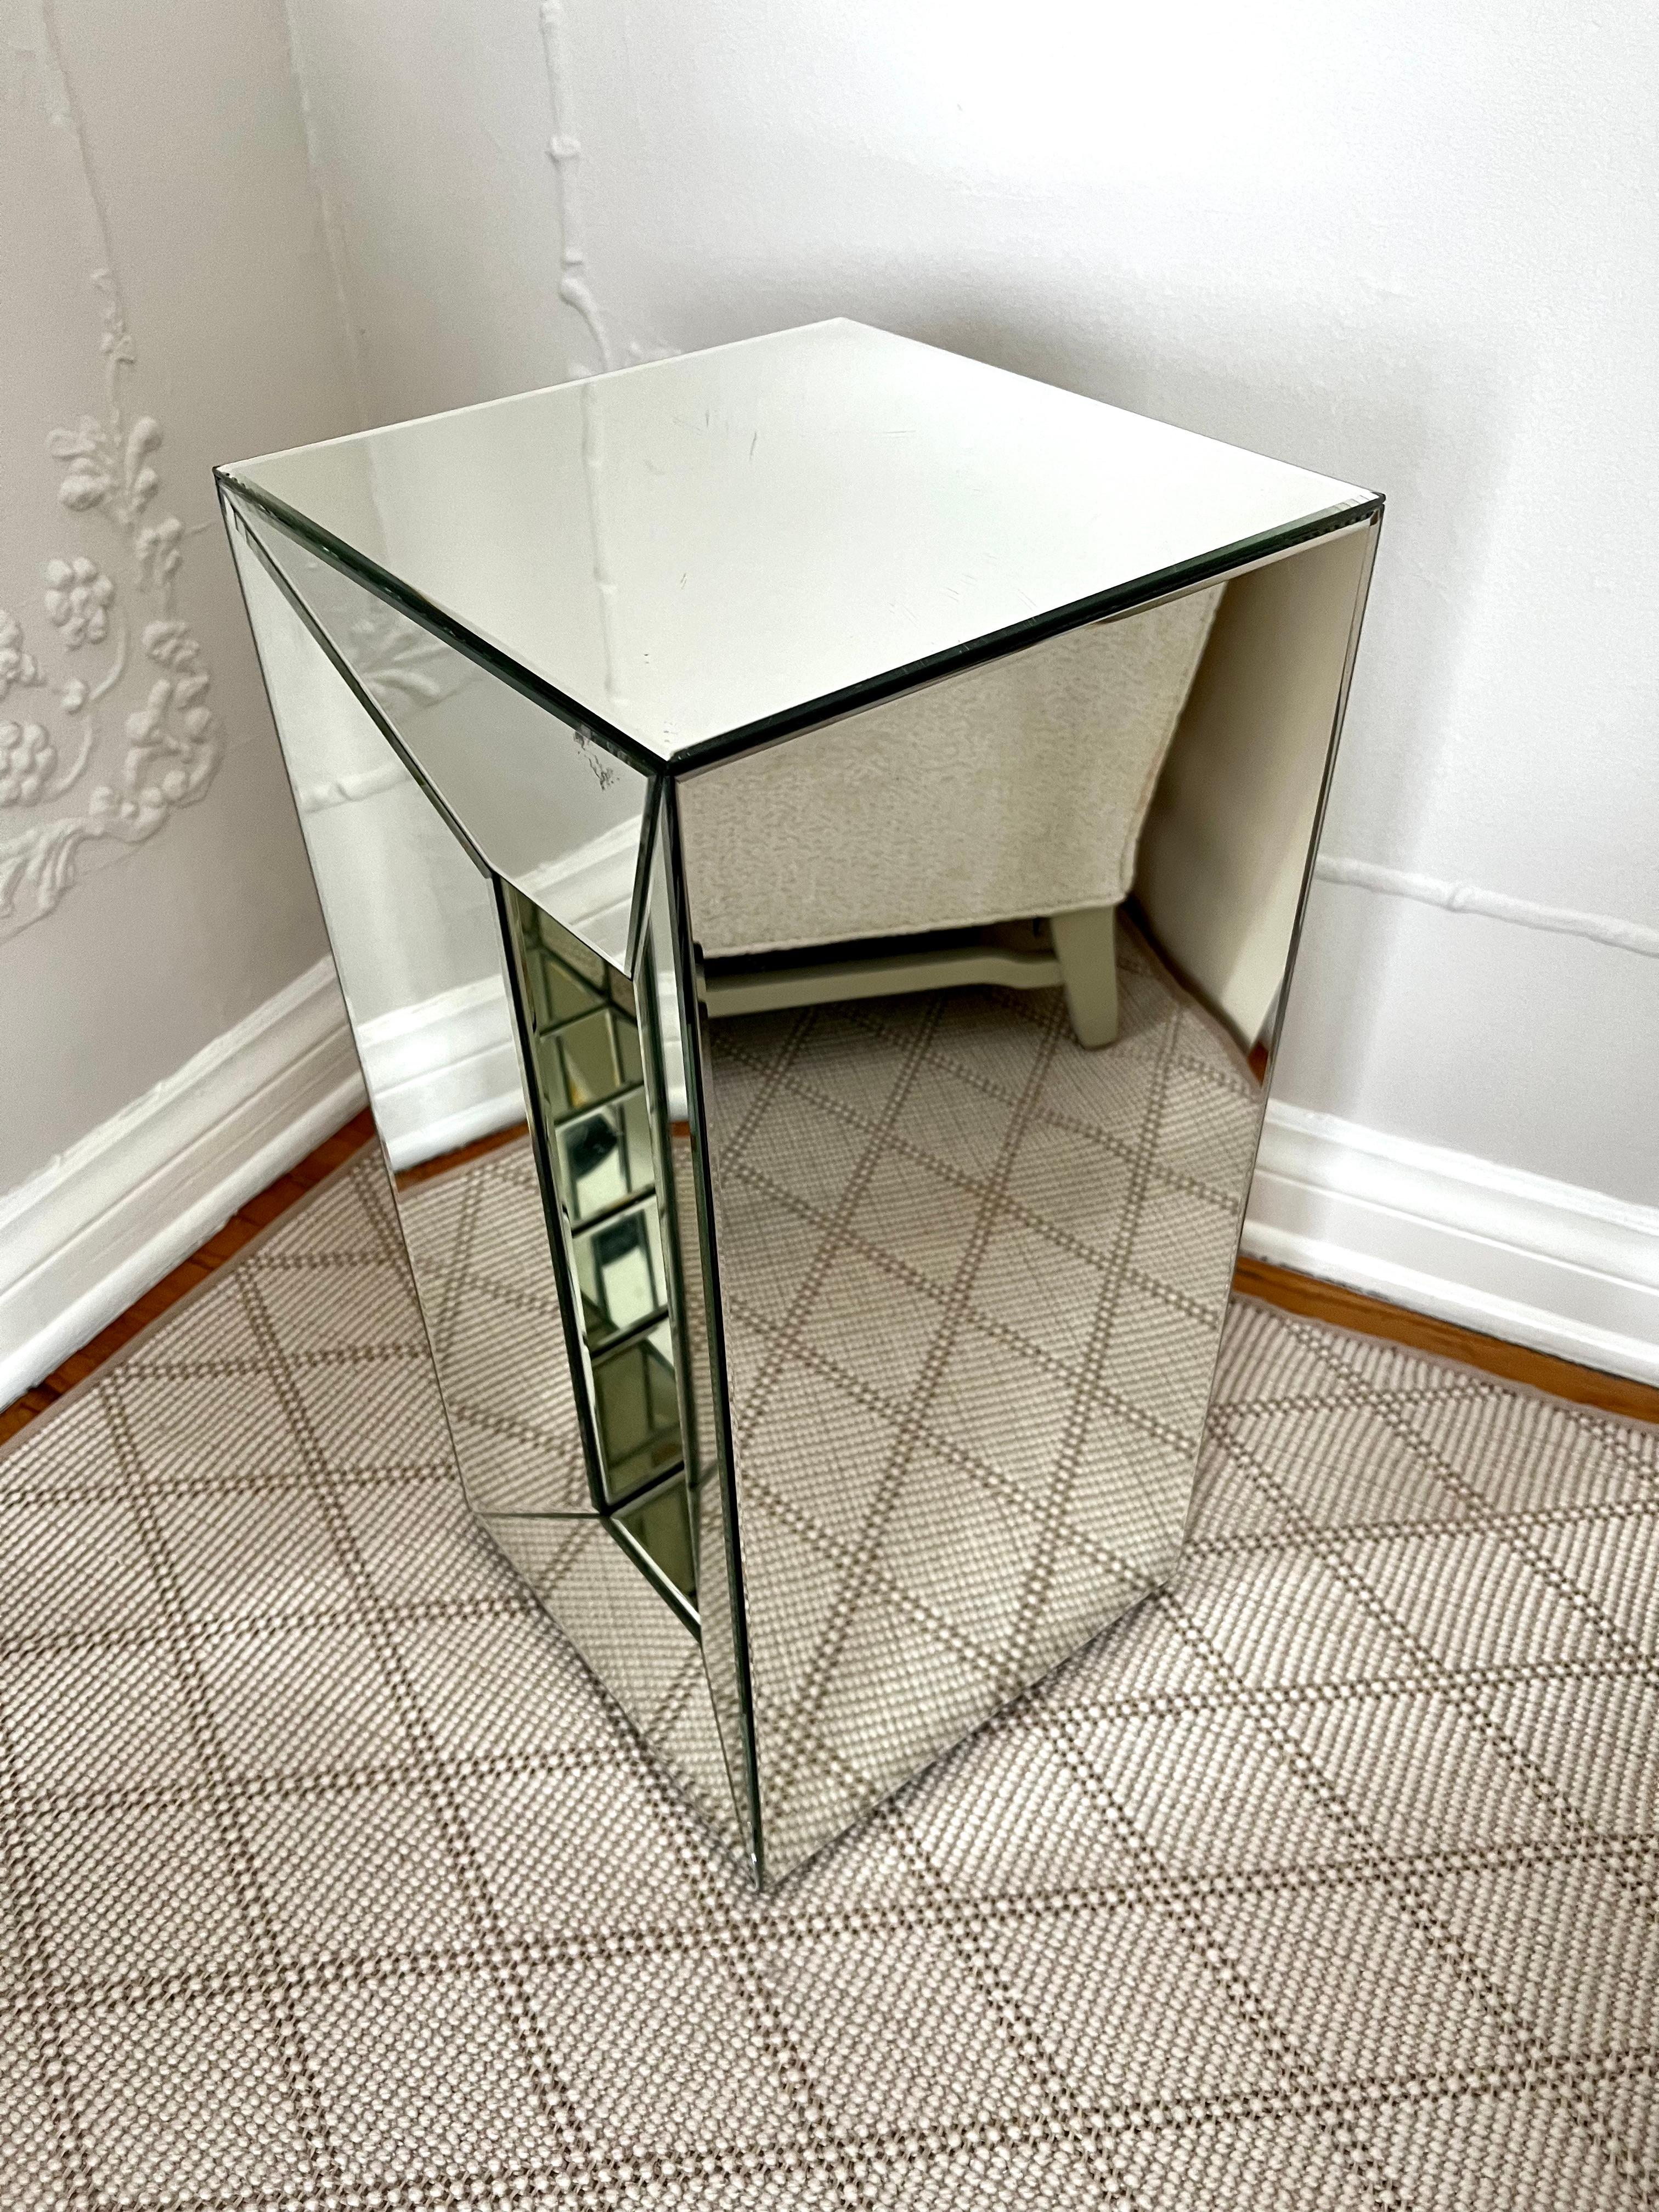 A simple mirror pedestal with a mirror cut-out that is asymmetrical to the piece. A compliment to many interiors and easily used for everything from art to plants and can be a side table or martini table - chic and simple